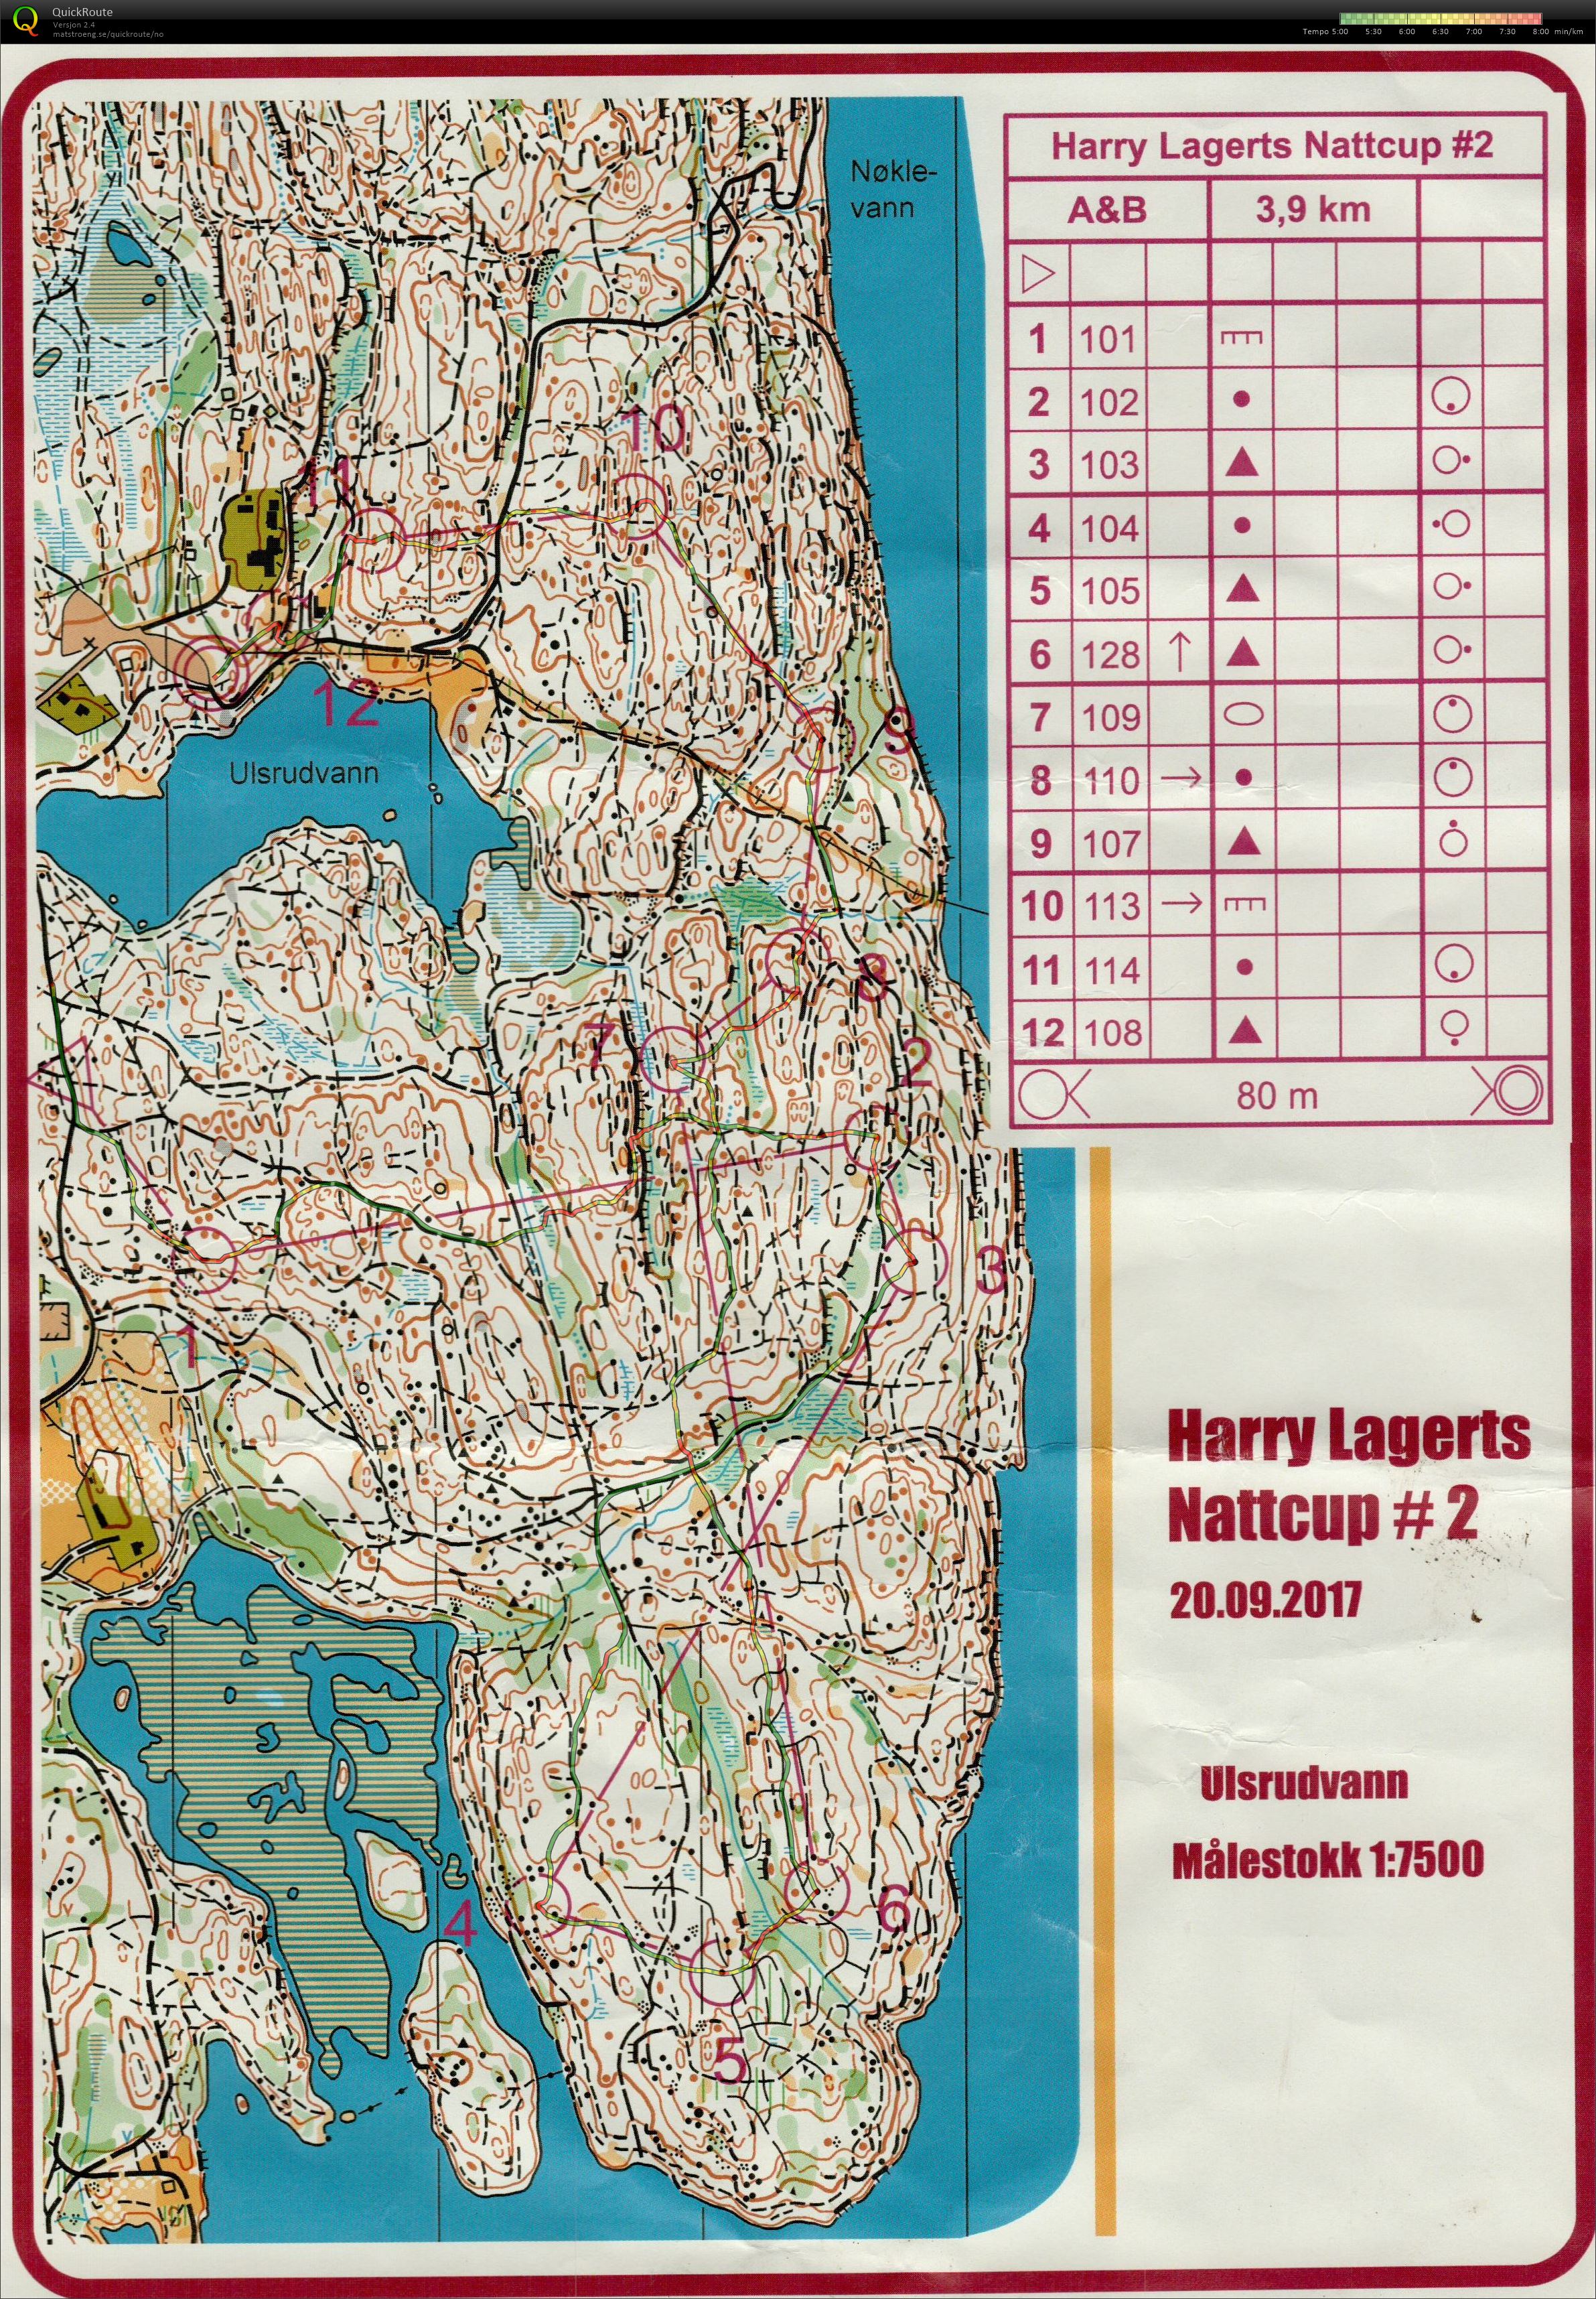 Harry Lagerts Nattcup #2 (2017-09-20)